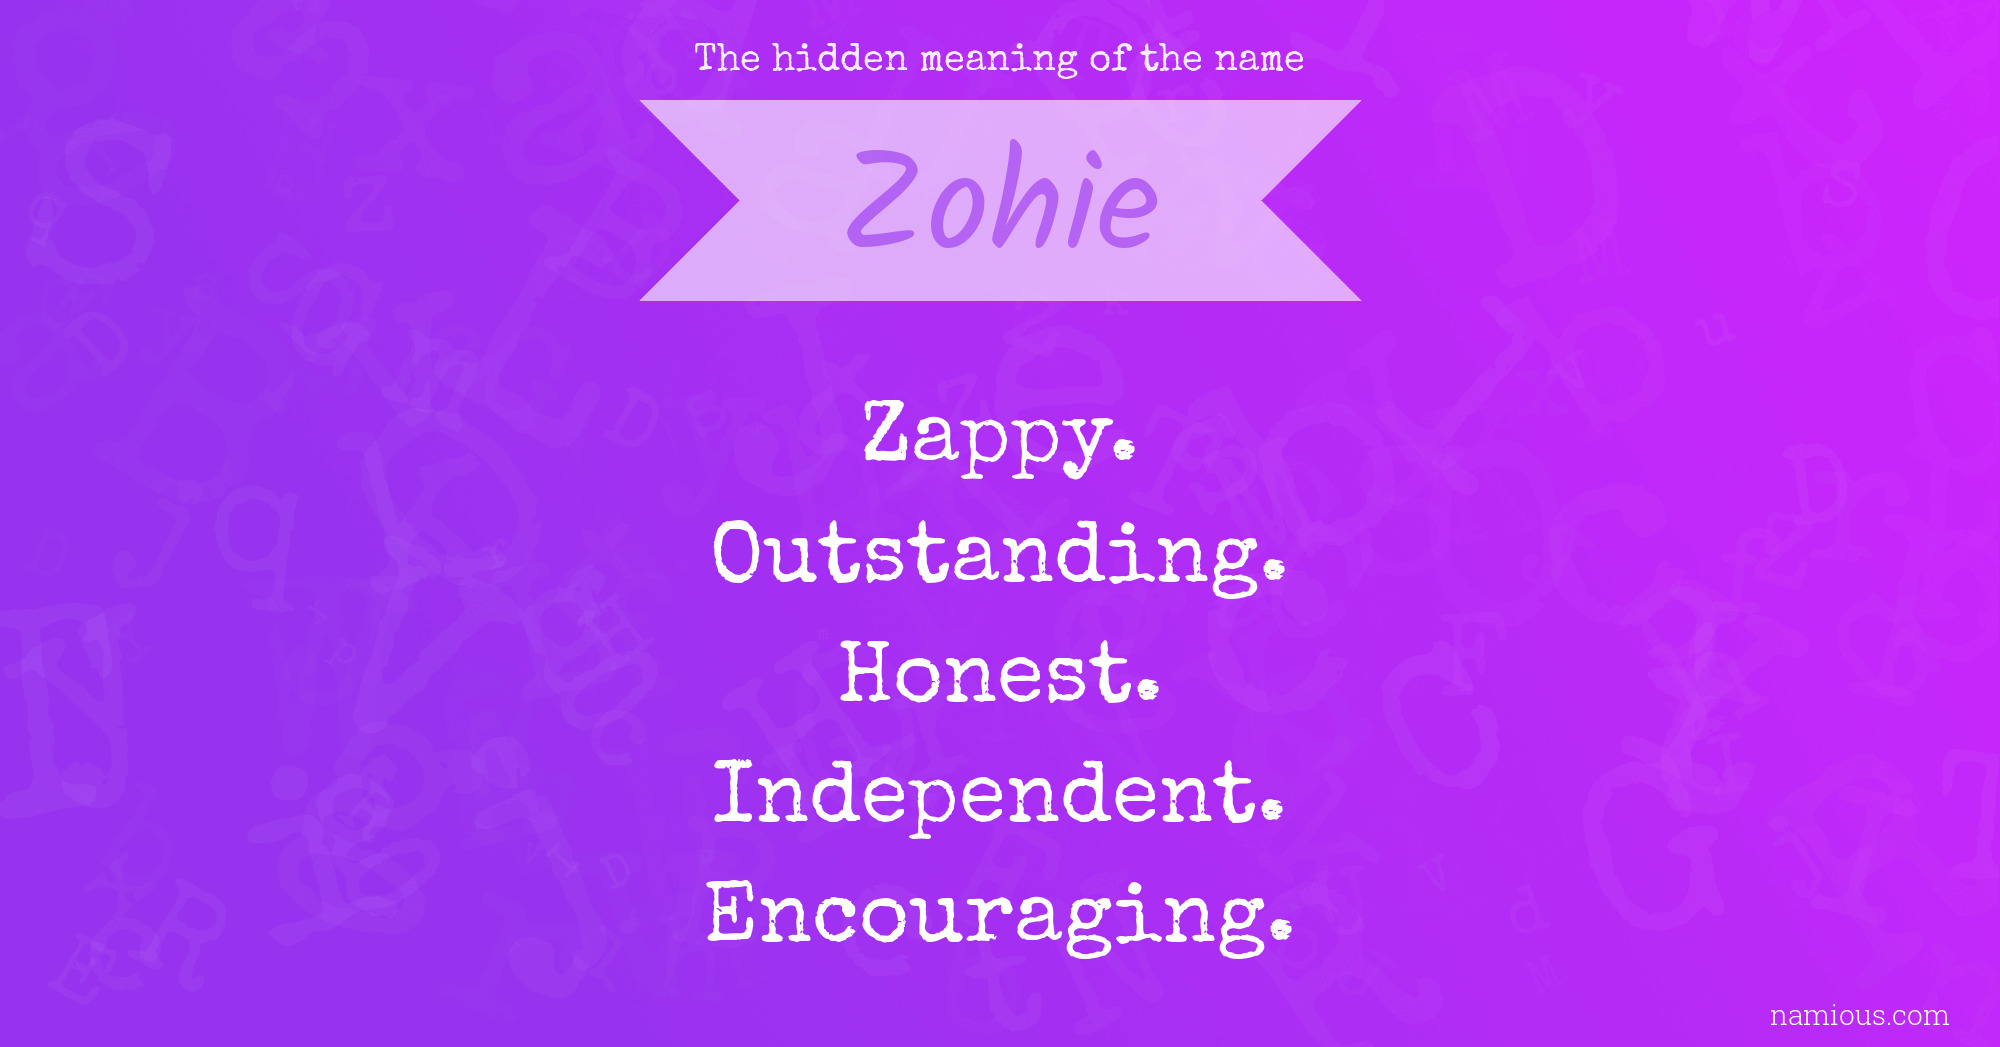 The hidden meaning of the name Zohie